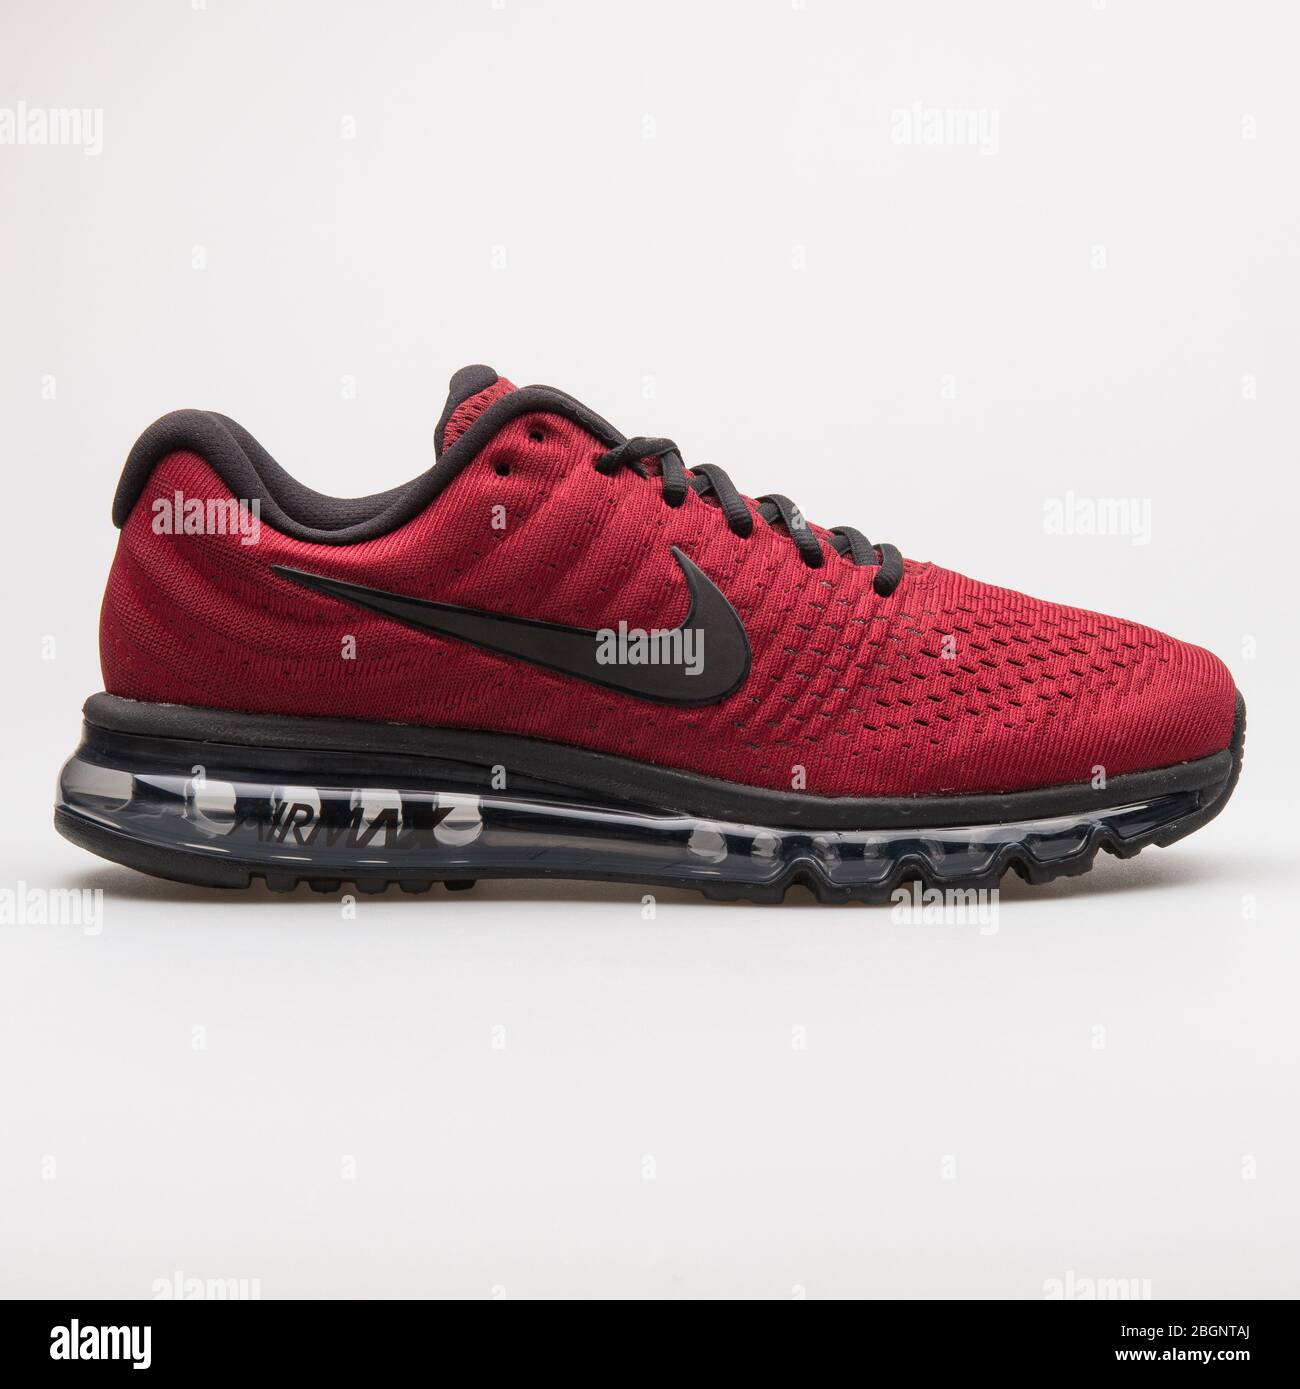 Nike Air Max 2017 team red sneaker on 